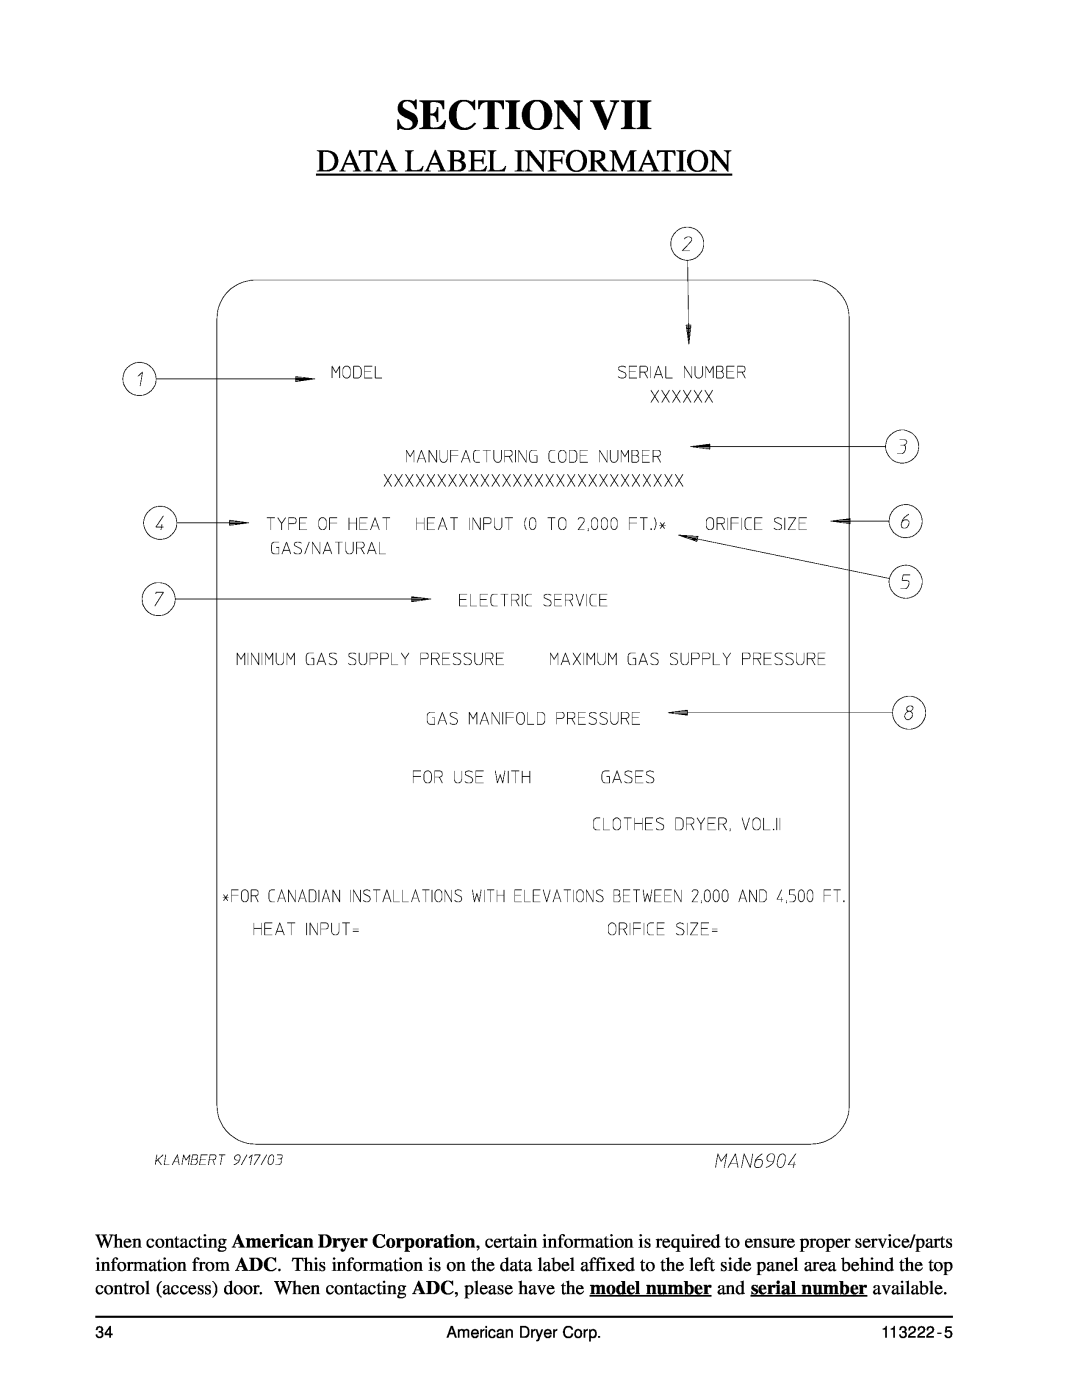 American Dryer Corp AD-24 Phase 7 installation manual Data Label Information, Section, American Dryer Corp, 113222 